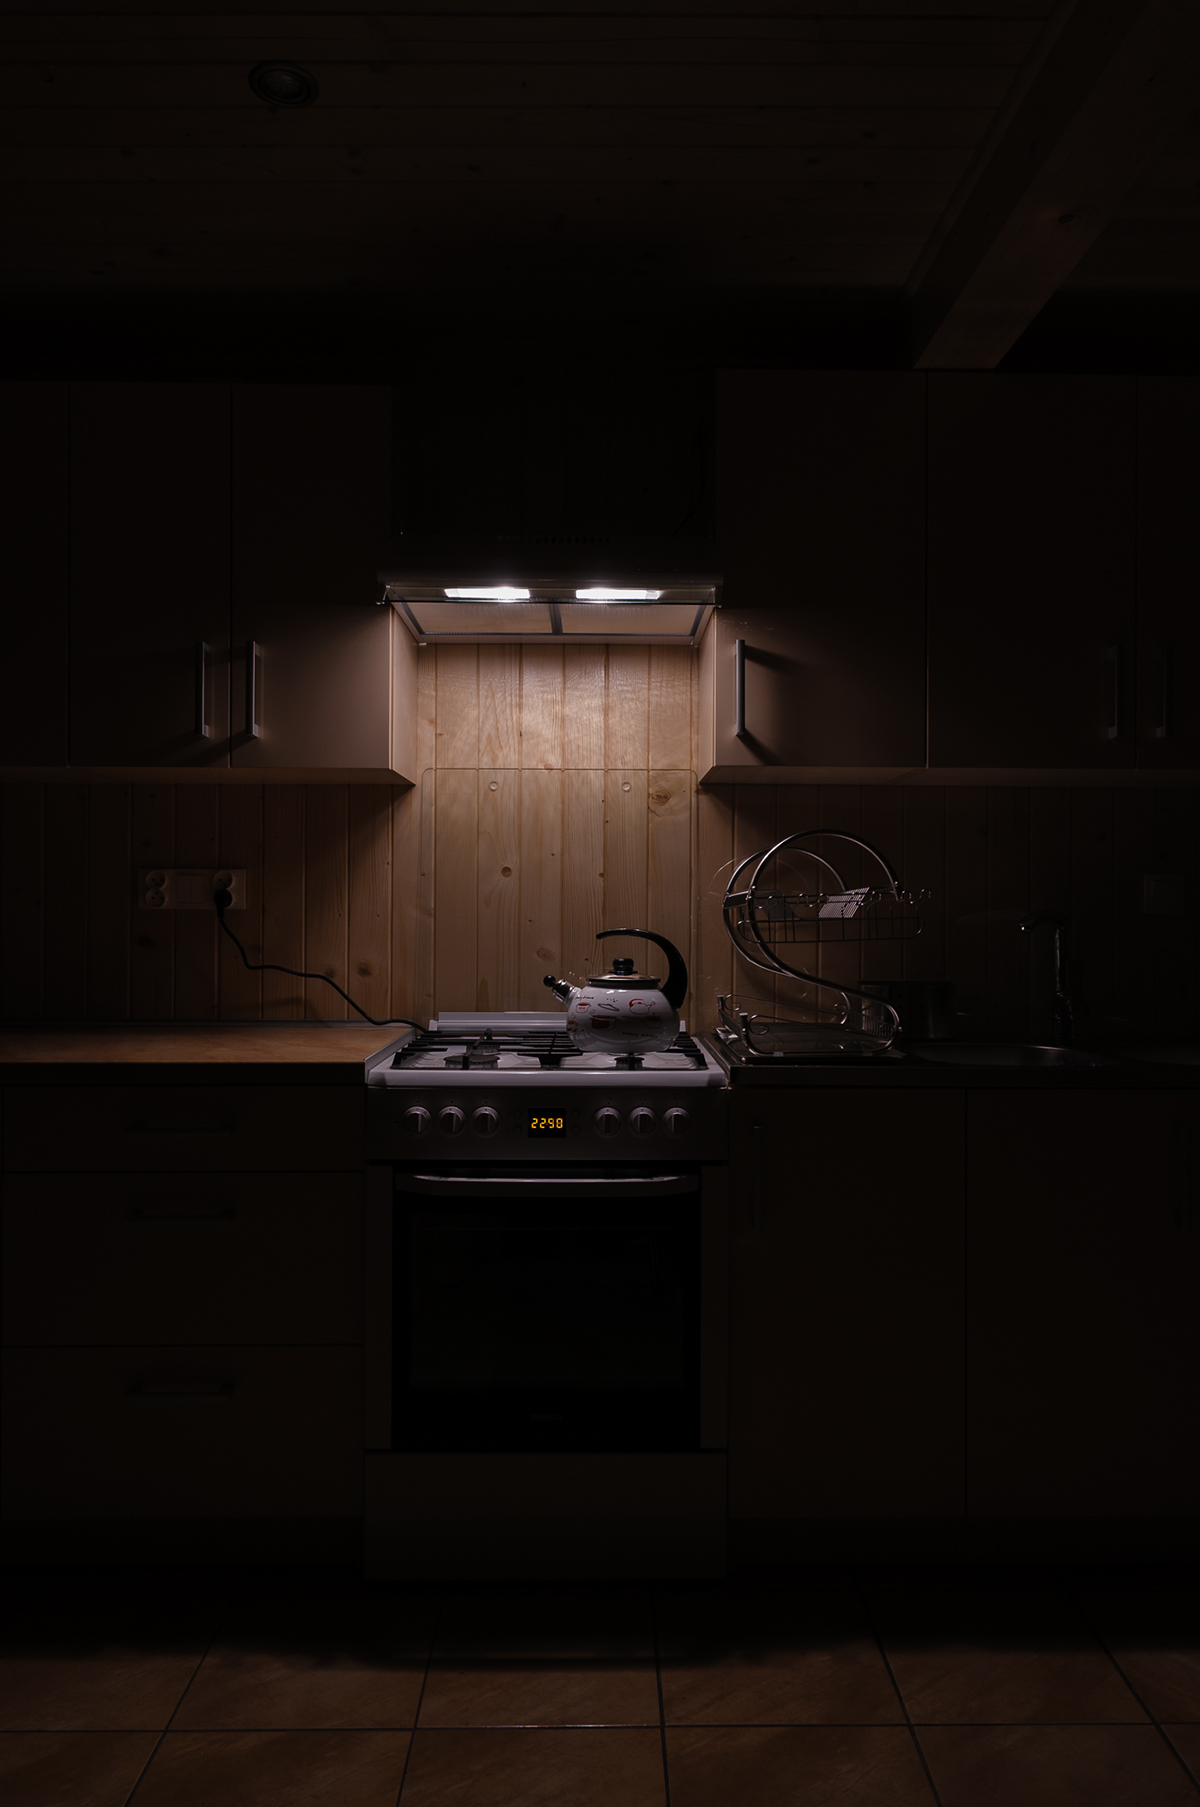 color copy space dark Iluminated Interior Indoors kitchen light device no people night oven rack stove wood pablo charnas